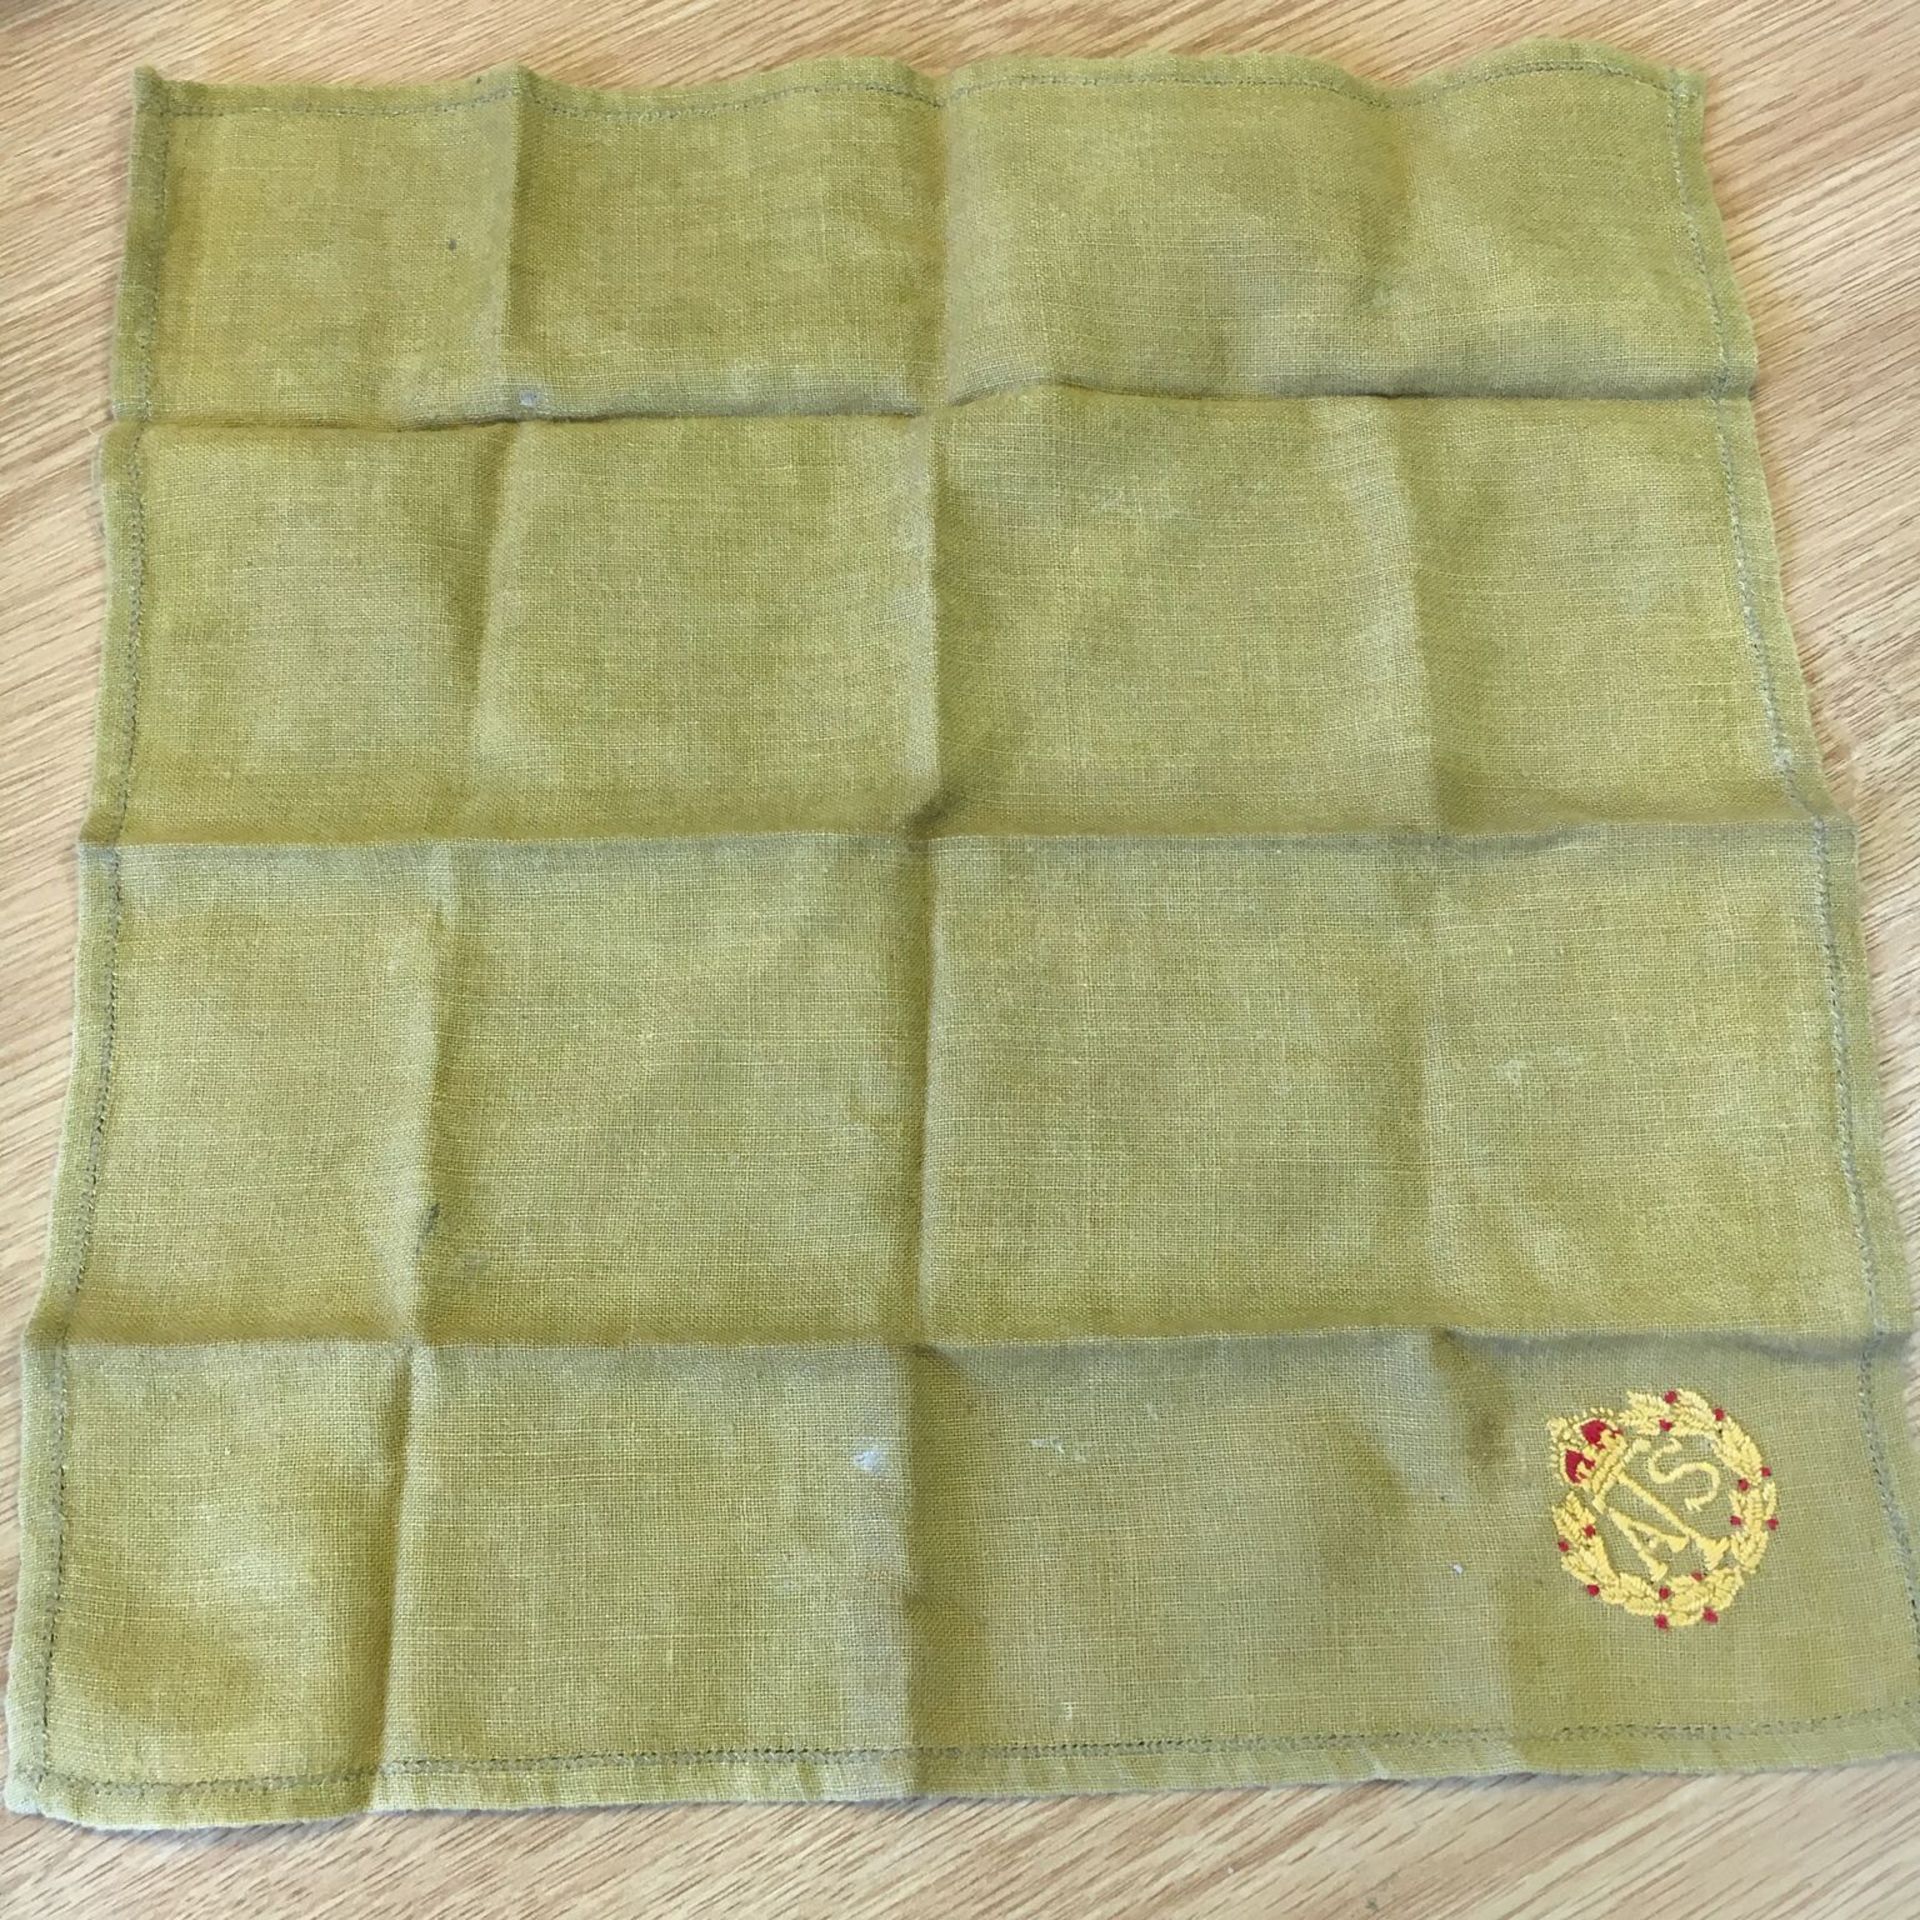 WW2 EMBROIDERED ATS (AUXILIARY TERRITORIAL SERVICE) ARMY HANDKERCHIEF - WOMEN IN WORLD WAR II